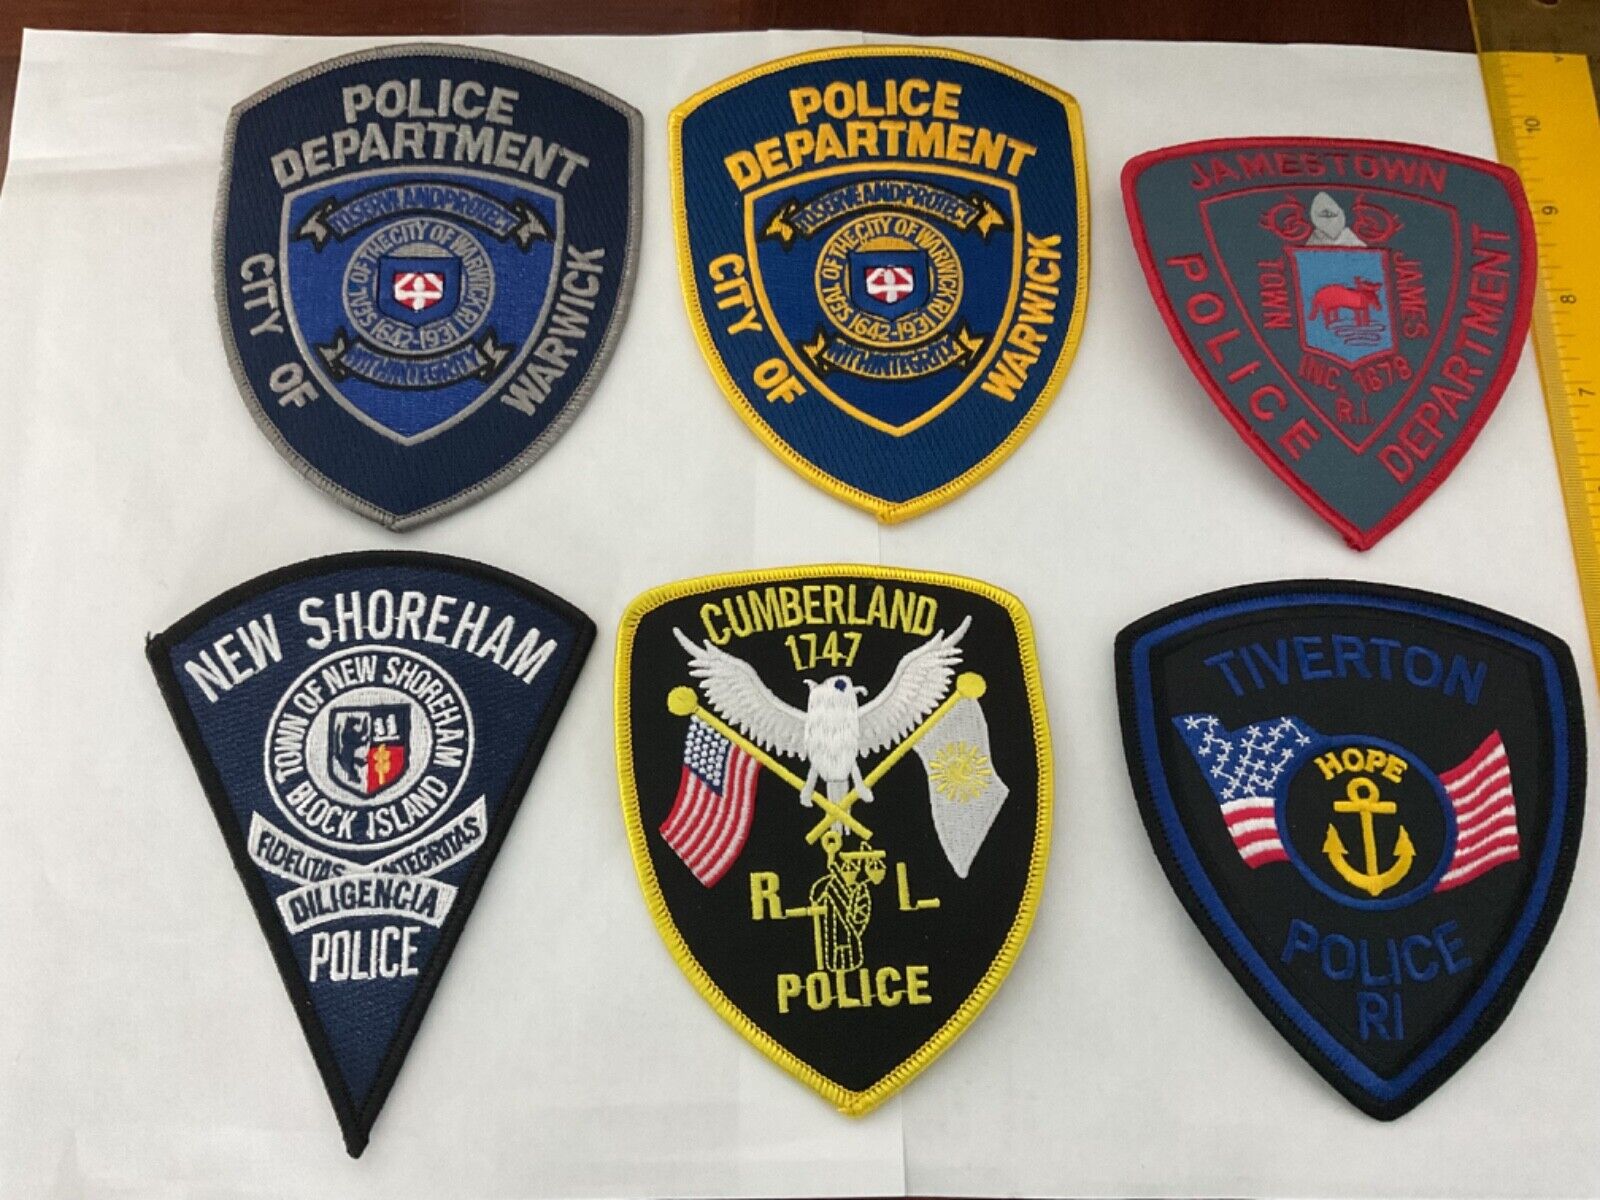 Rhode Island  Police  Law Enforcement collectable Patch Set 6 pieces full size.